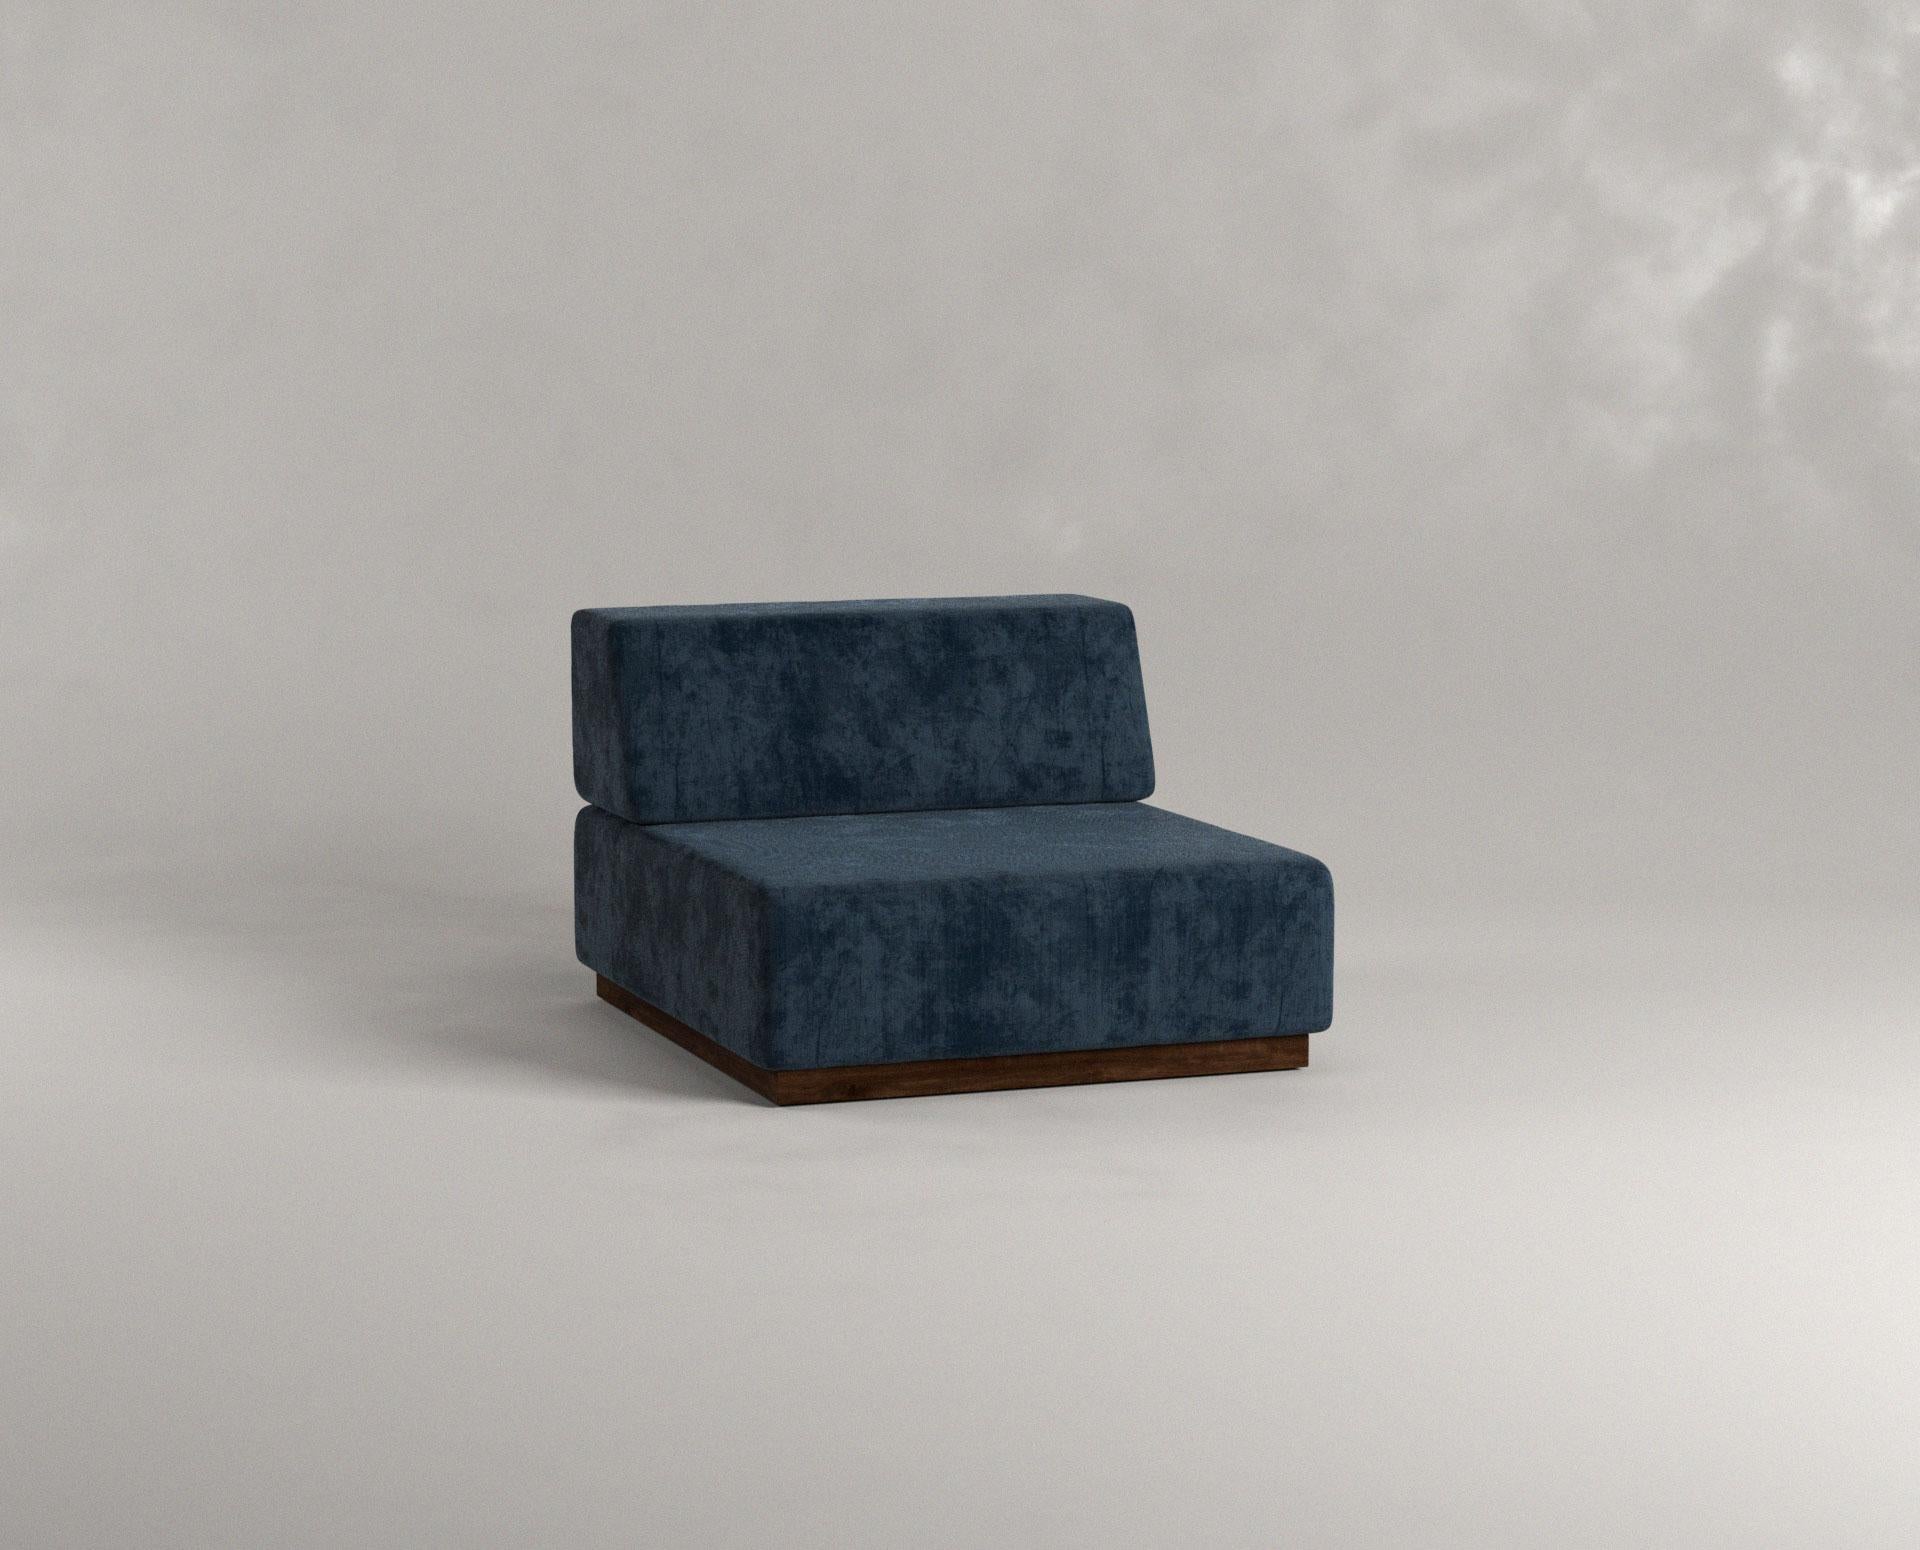 Other Black Nube Lounger by Siete Studio For Sale